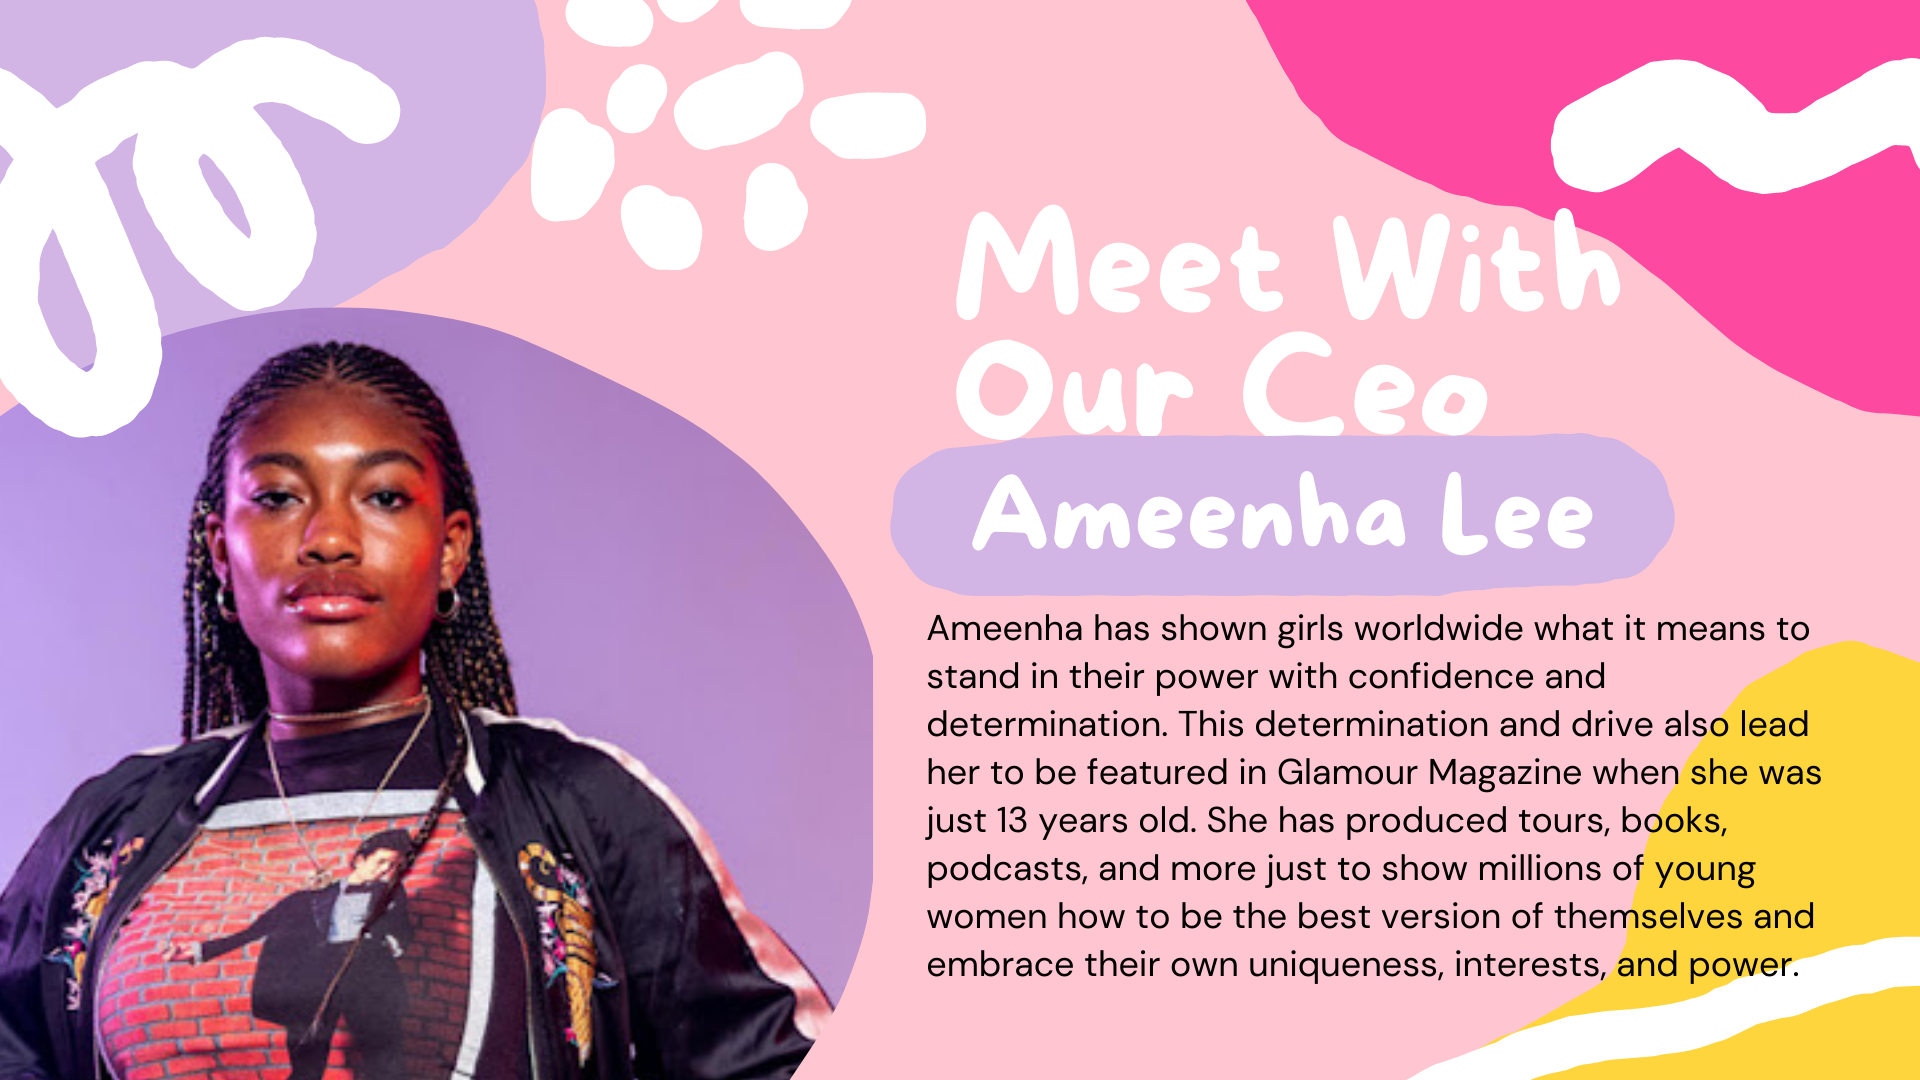 About Ameenha Lee